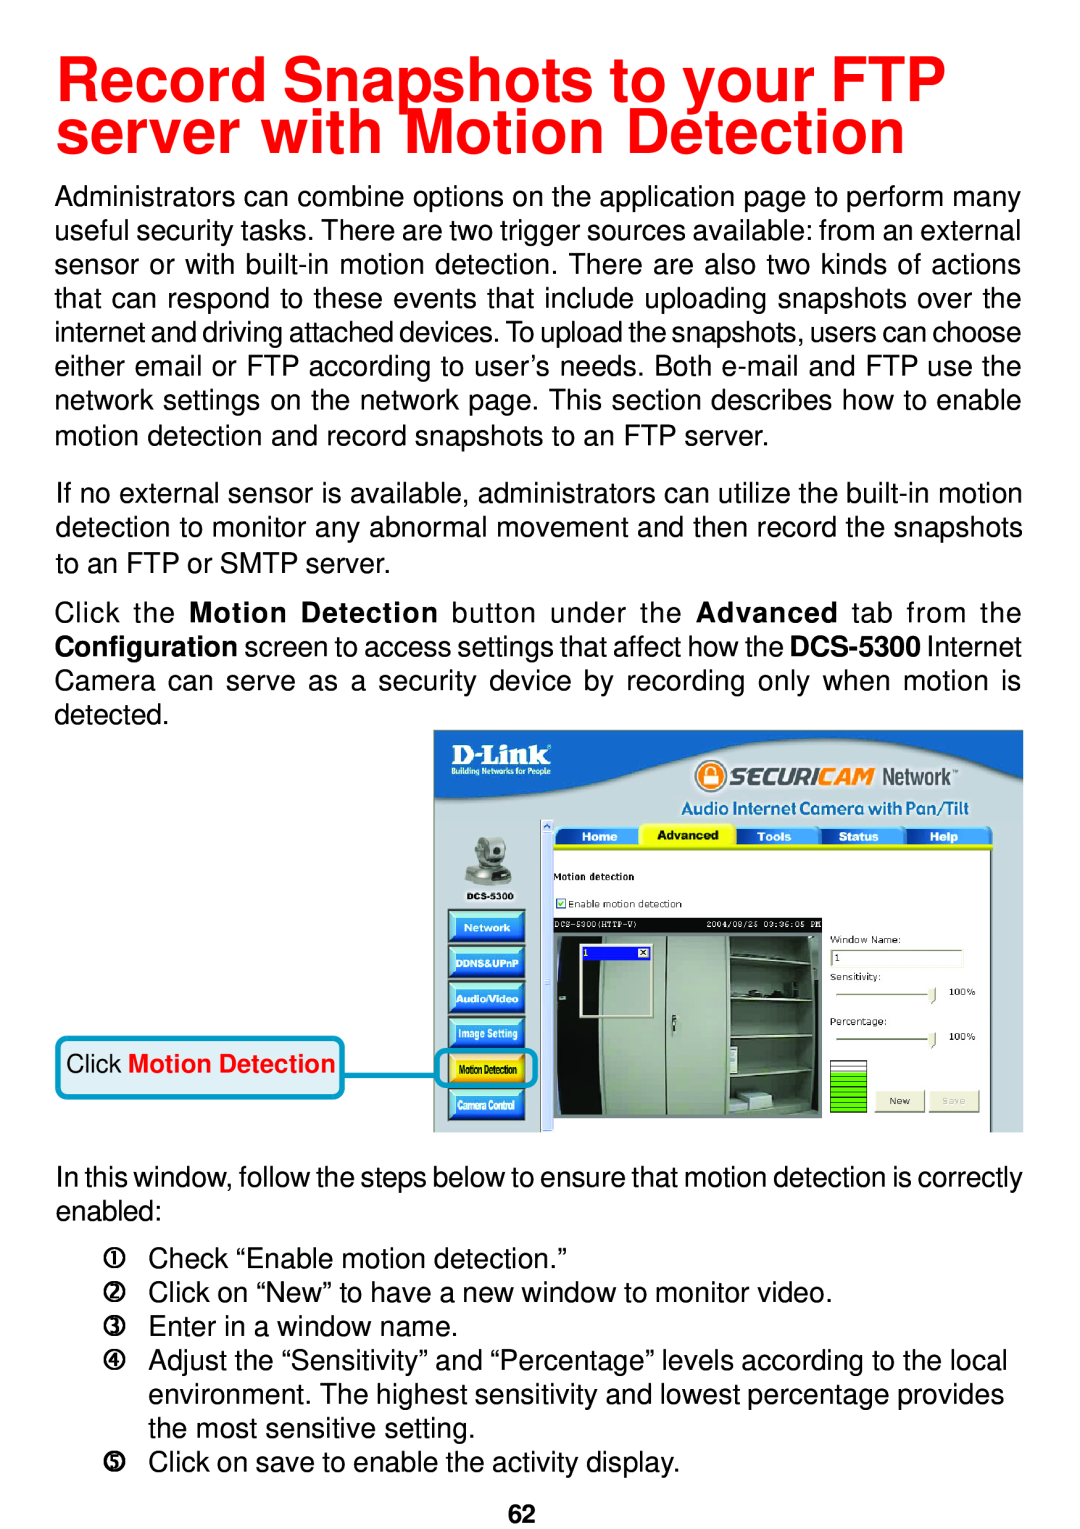 D-Link DCS-5300 manual Record Snapshots to your FTP server with Motion Detection 